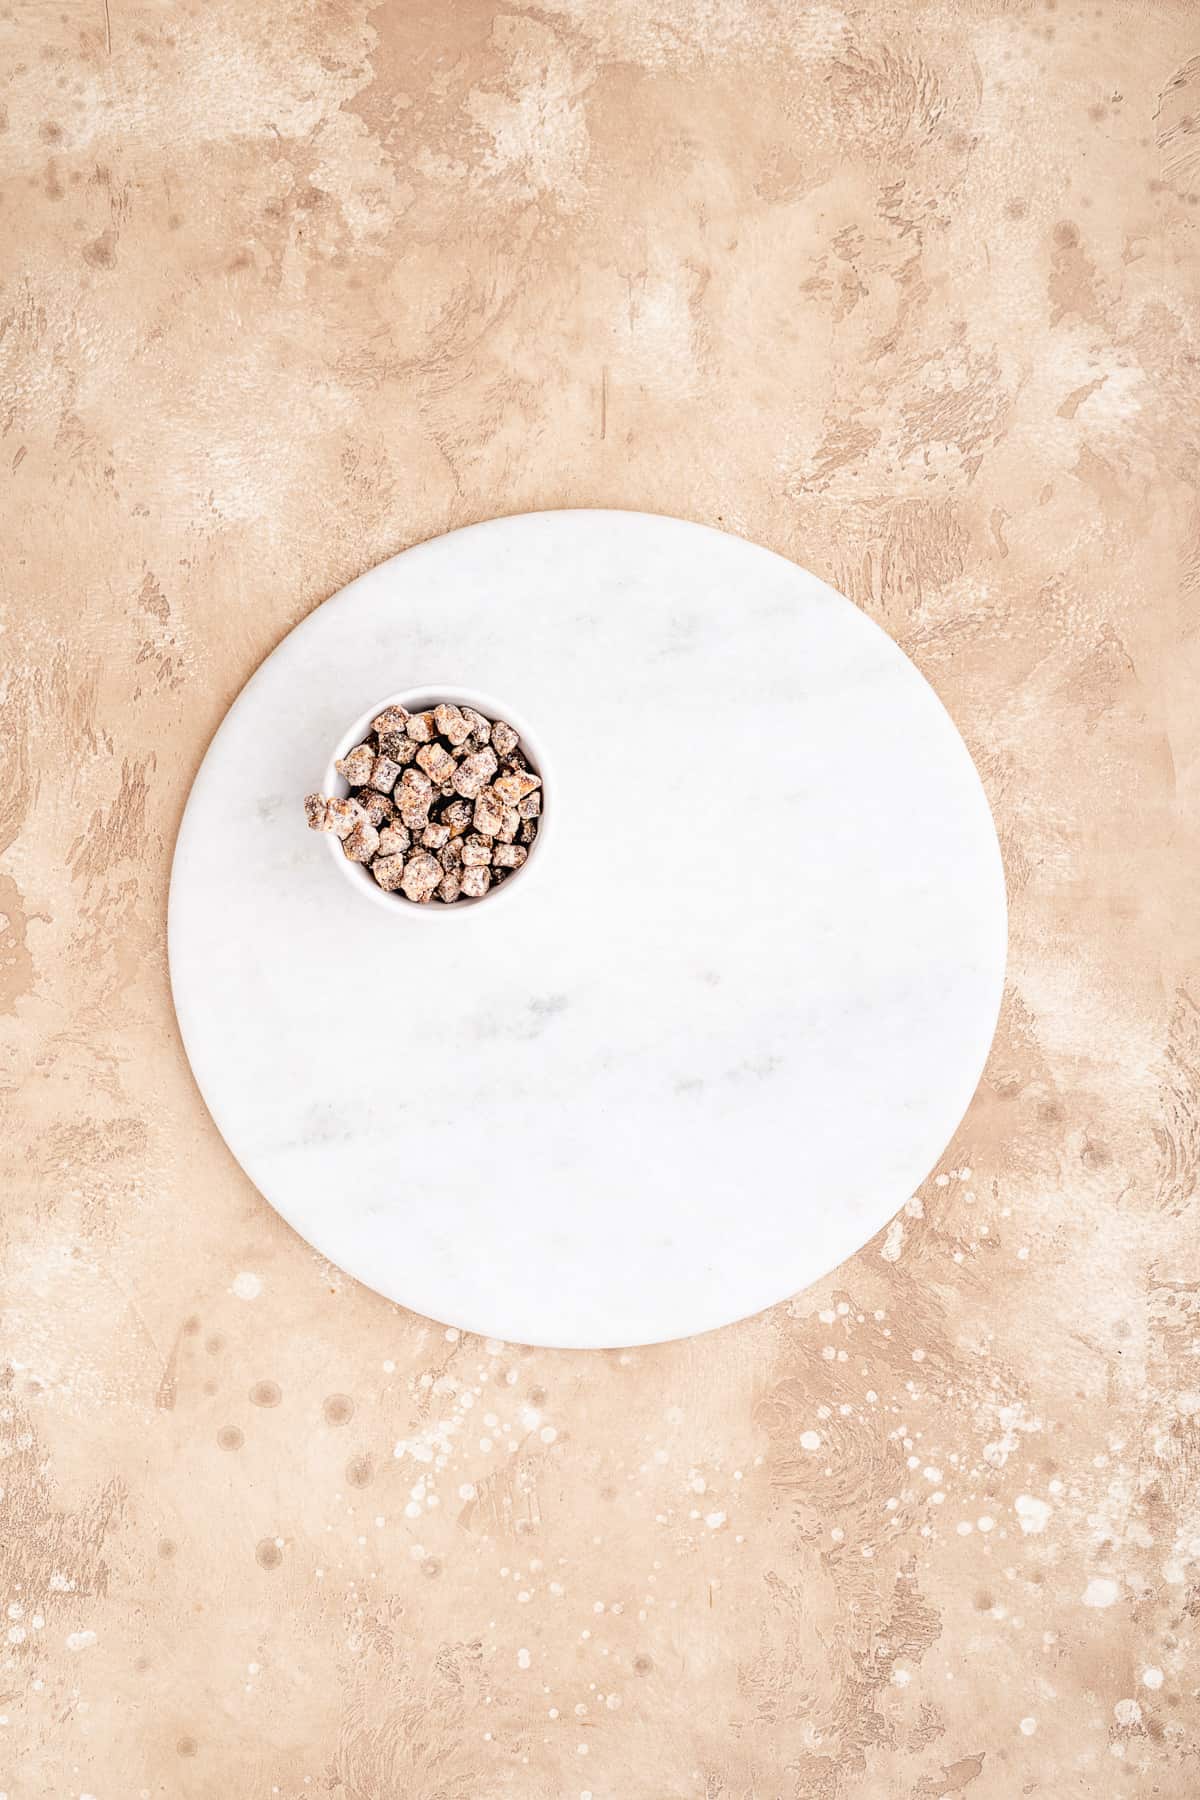 Overhead photo of white marble cake platter with small white bowl of nuts placed on the platter to begin building the charcuterie board.  